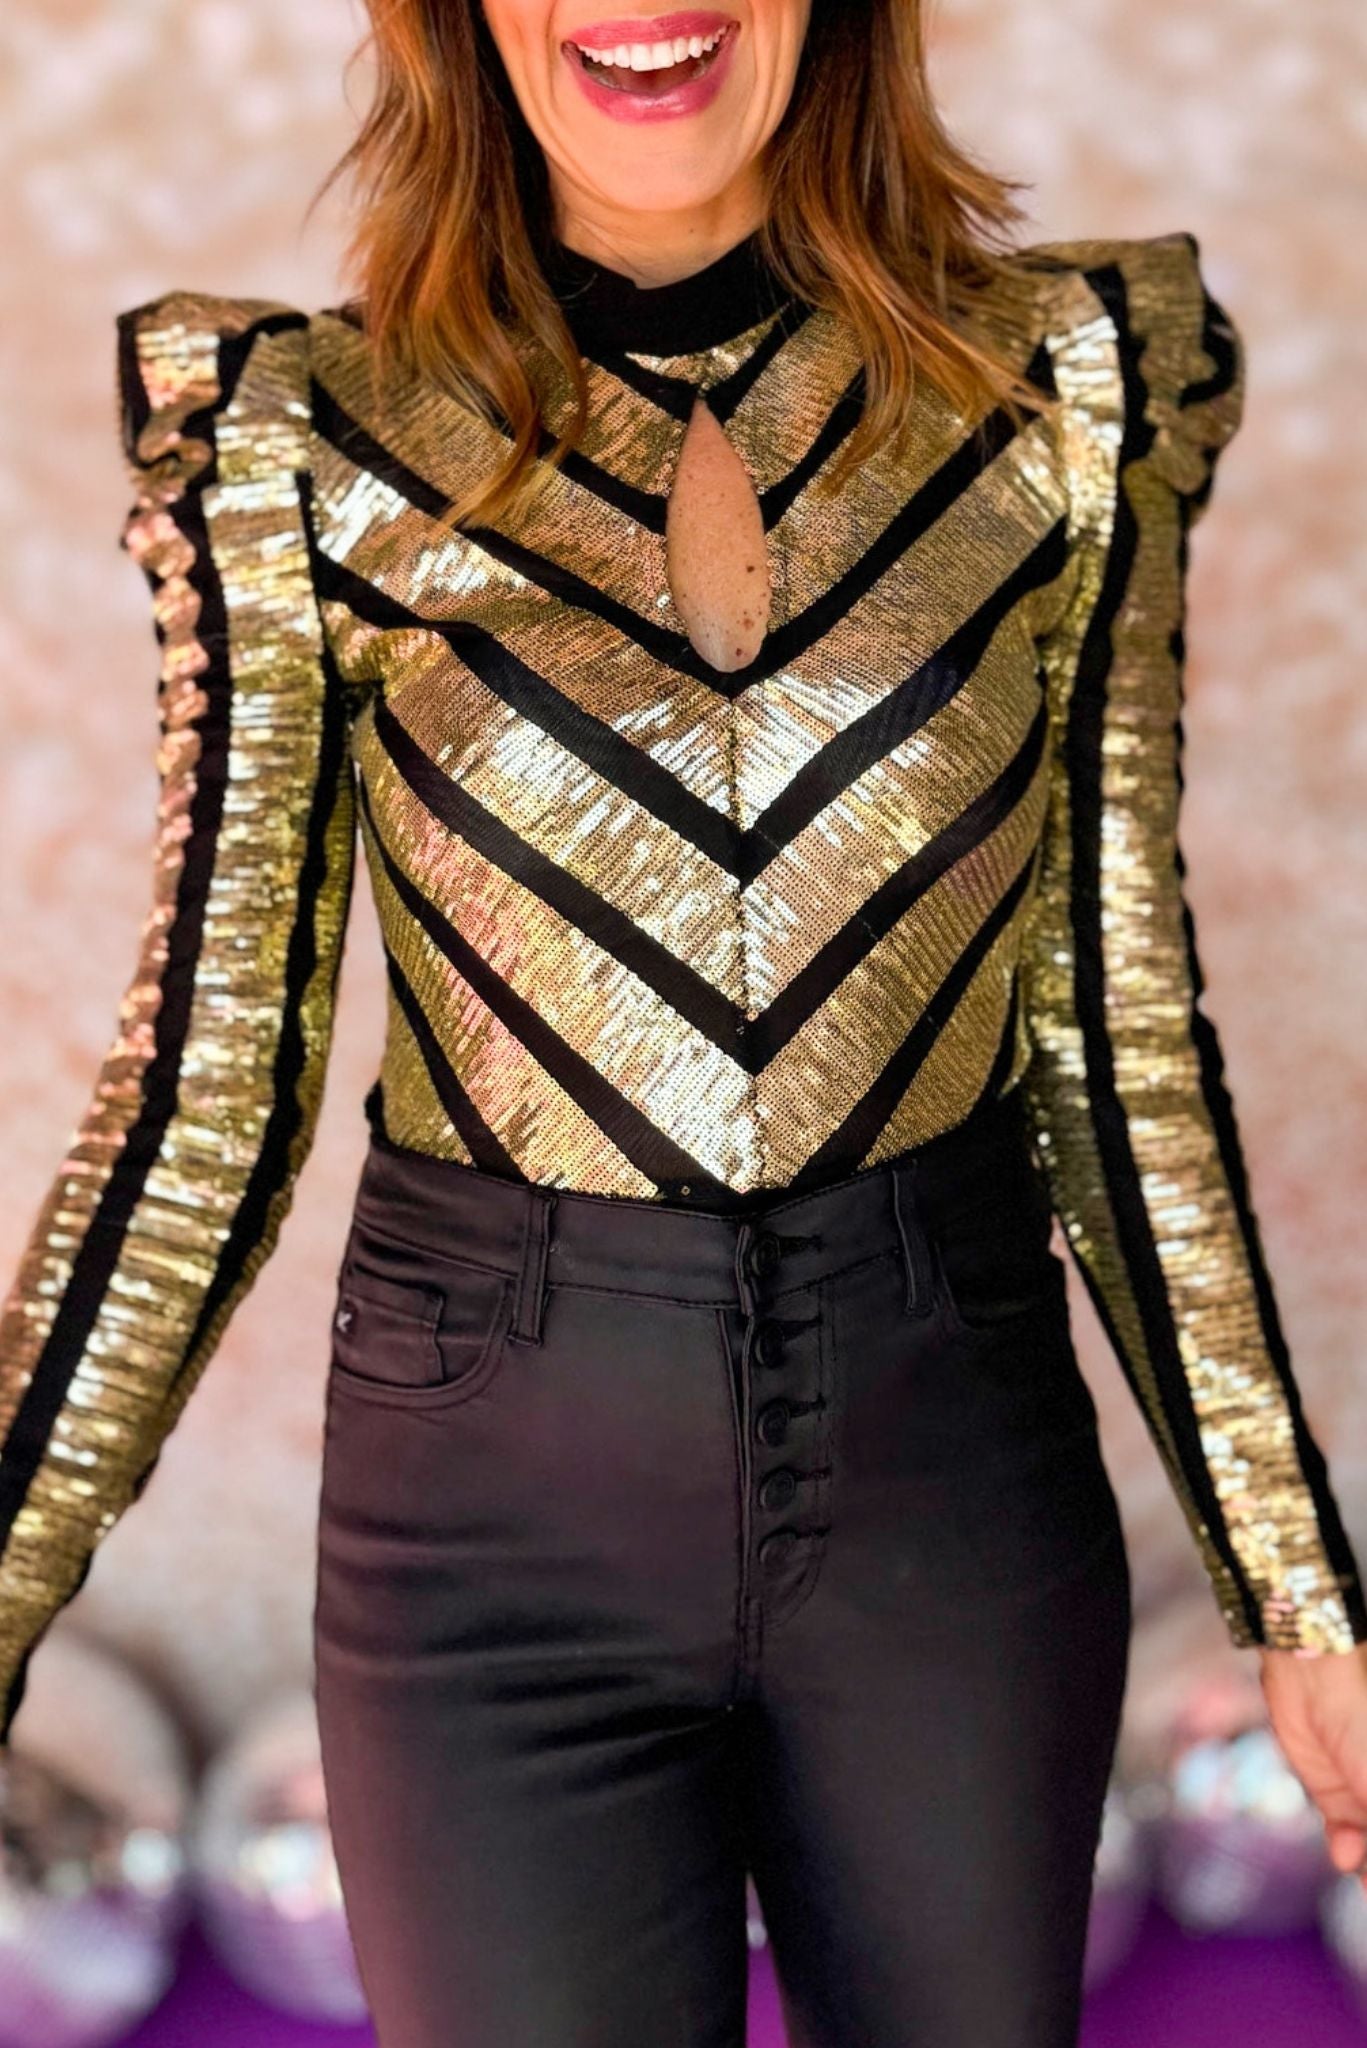 Black Gold Cut Out Long Sleeve Sequin Bodysuit, sequin, keyhole cutout, glam, nye outfit, night out look, shop style your senses by mallory fitzsimmons